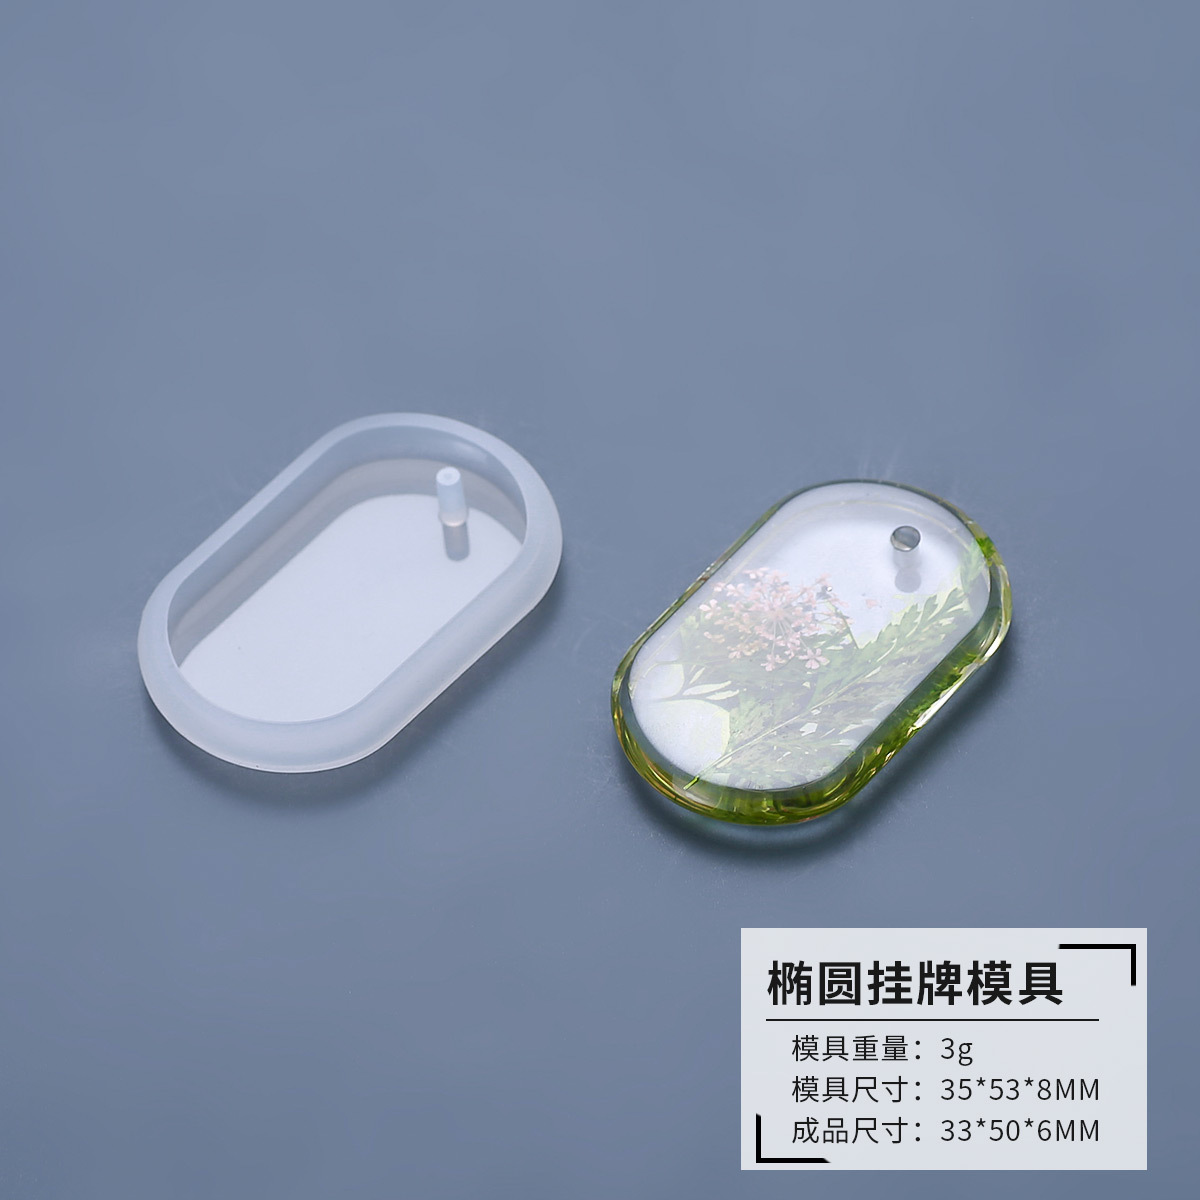 3:Oval listing mold 35*53*8mm